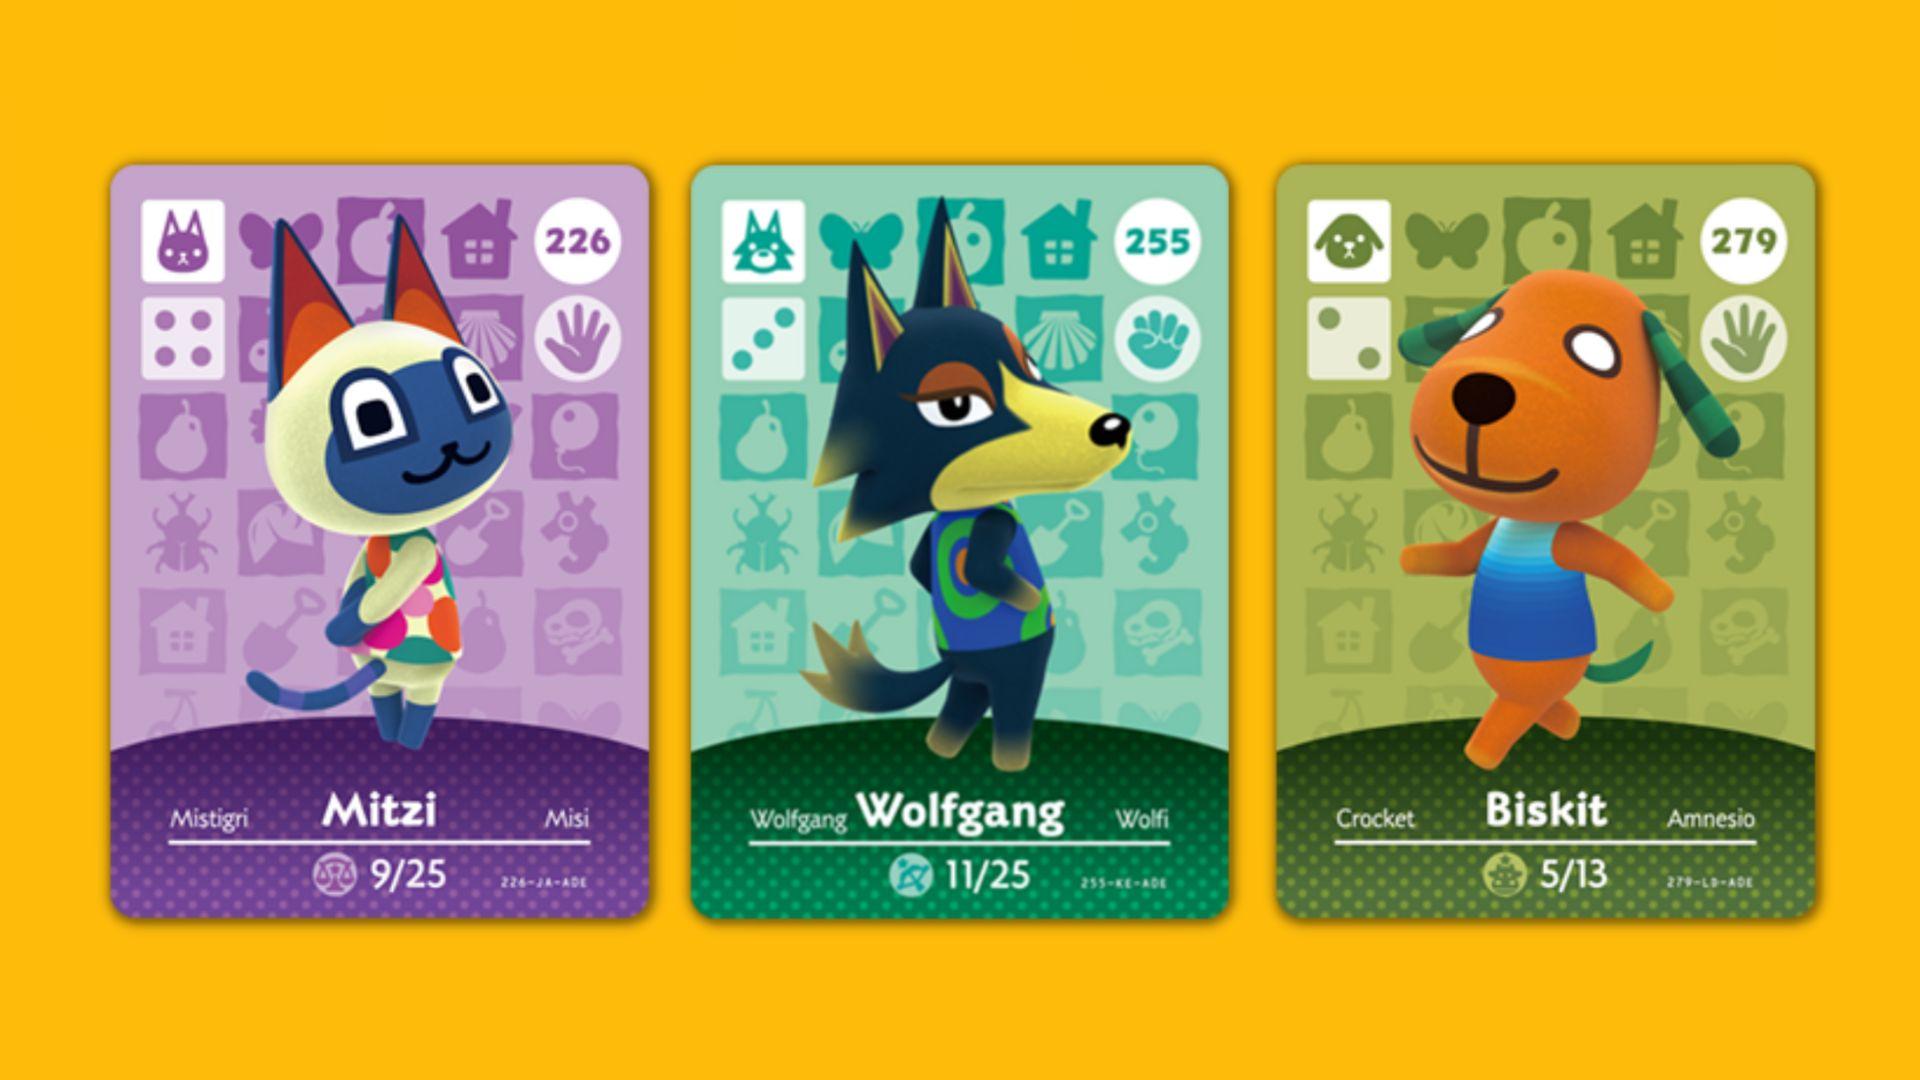 Every Animal Crossing Amiibo Card For New Horizons And New Leaf